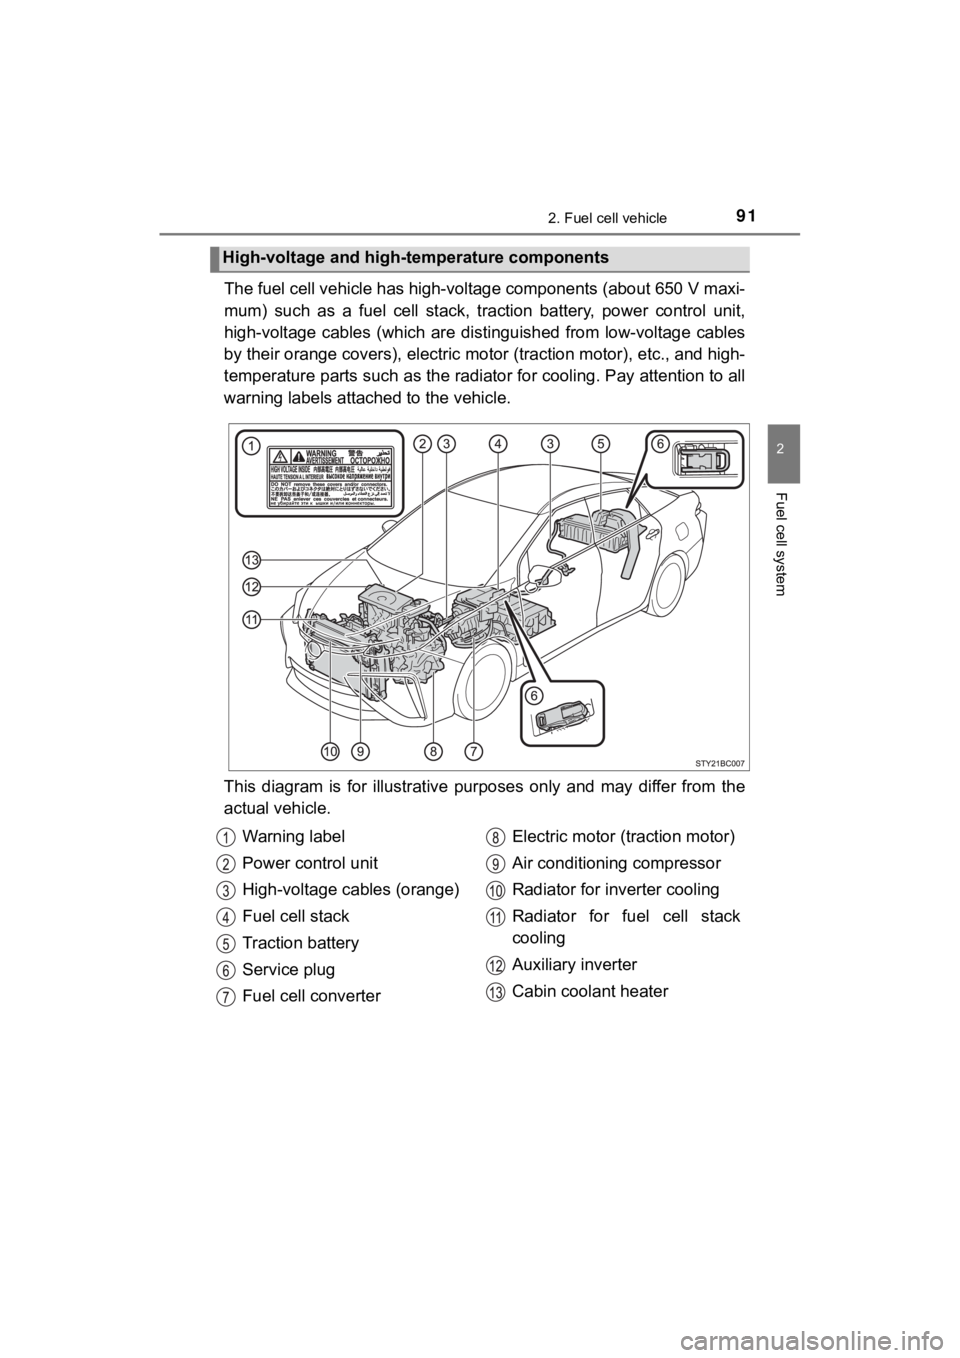 TOYOTA MIRAI 2019  Owners Manual (in English) 912. Fuel cell vehicle
2
Fuel cell system
MIRAI_OM_USA_OM62054U(18MY)_O
M62048U(19MY)
The fuel cell vehicle has high-voltage components (about 650 V m axi-
mum)  such  as  a  fuel  cell  stack,   trac